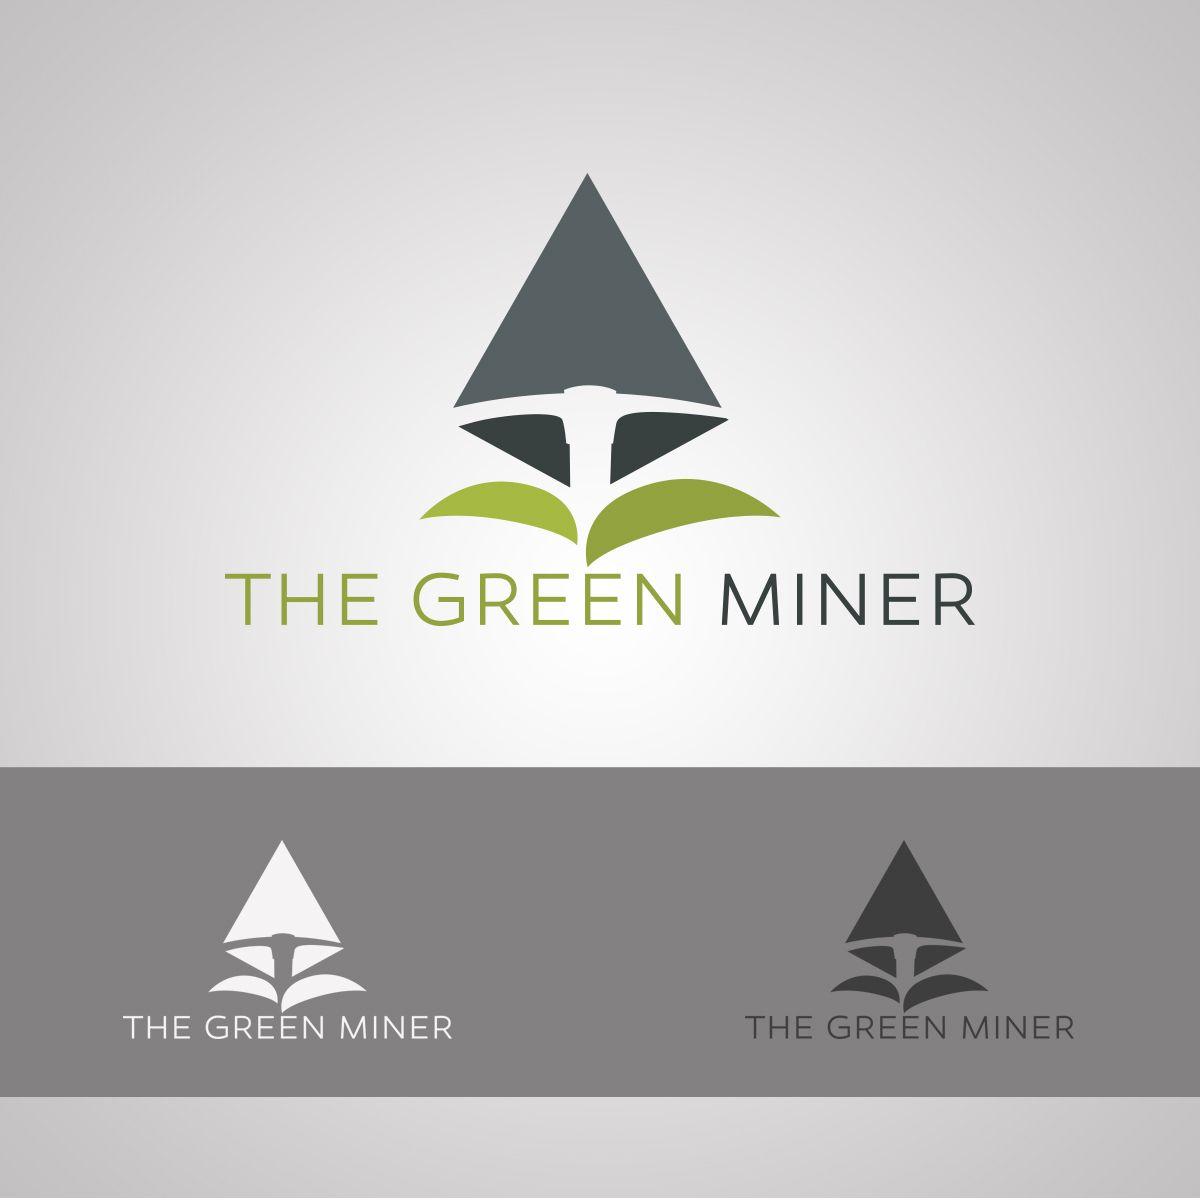 Green Triangle Company Logo - Modern, Bold, It Company Logo Design for The Green Miner by 21.owl ...